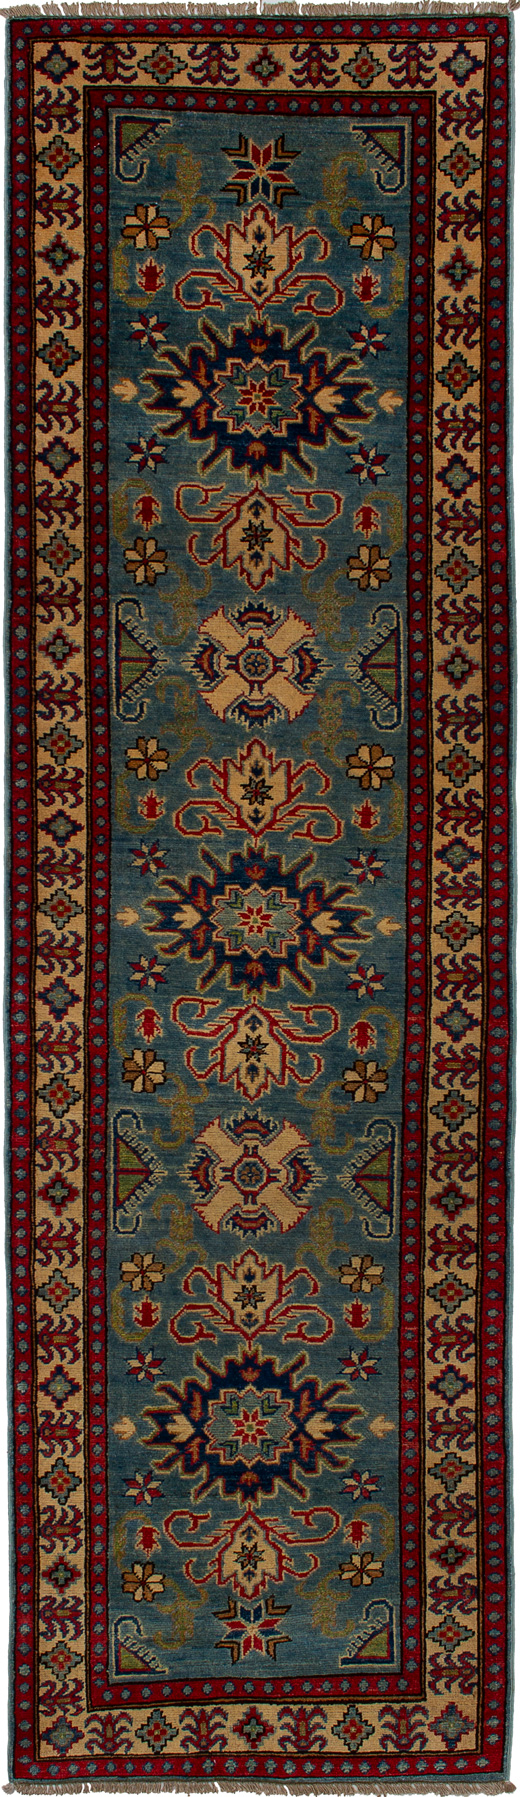 Hand-knotted Finest Gazni Turquoise Wool Rug 2'7" x 9'4" Size: 2'7" x 9'4"  